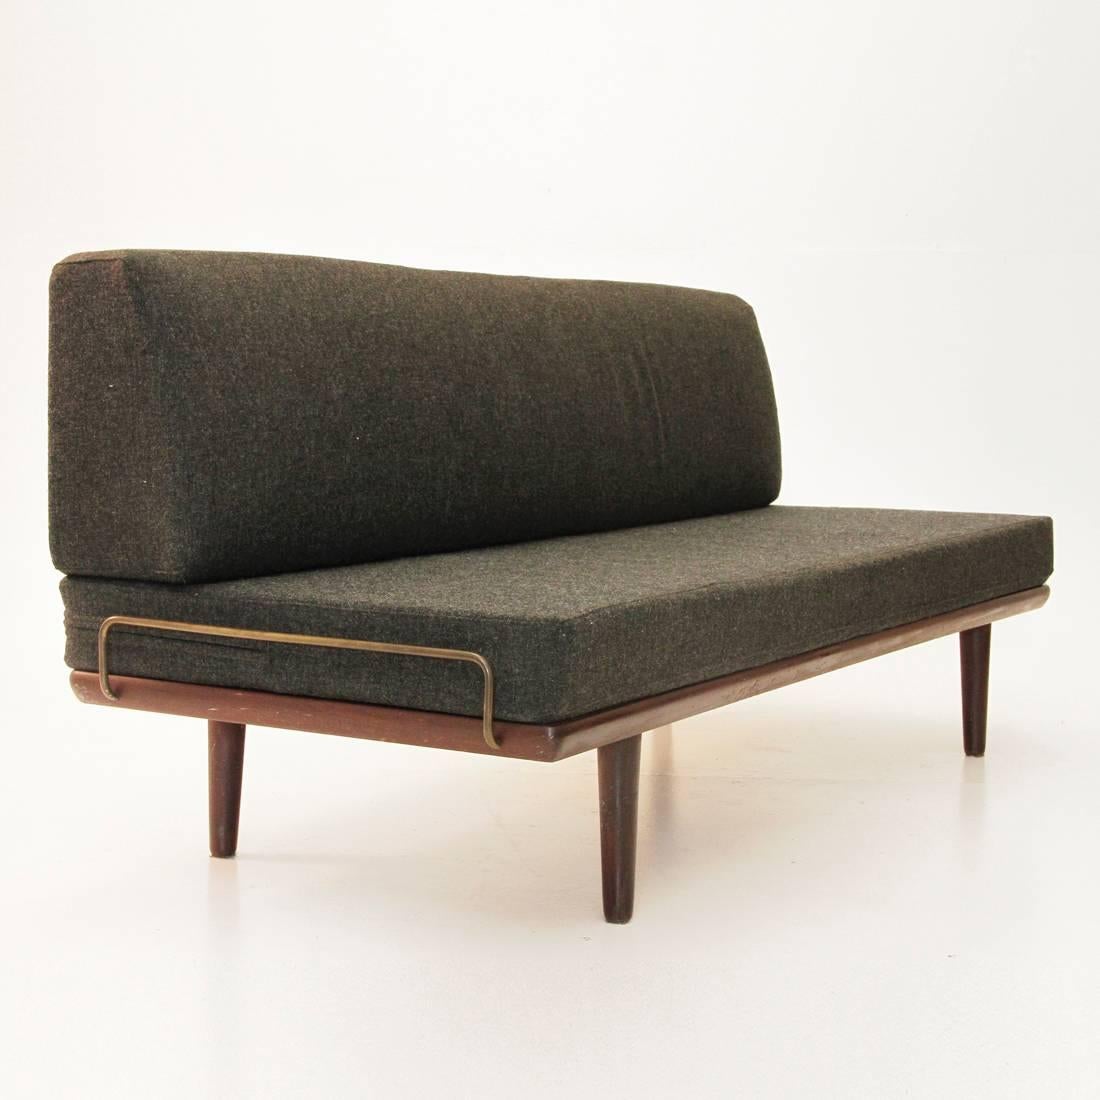 Danish daybed designed by Hans Wegner in 1956 and produced by Getama
Double function: sofa with back cushion leaning against the seat, or daybed without the cushion
Solid teak structure
Brass rods for locking the mattress
Upholstered in original